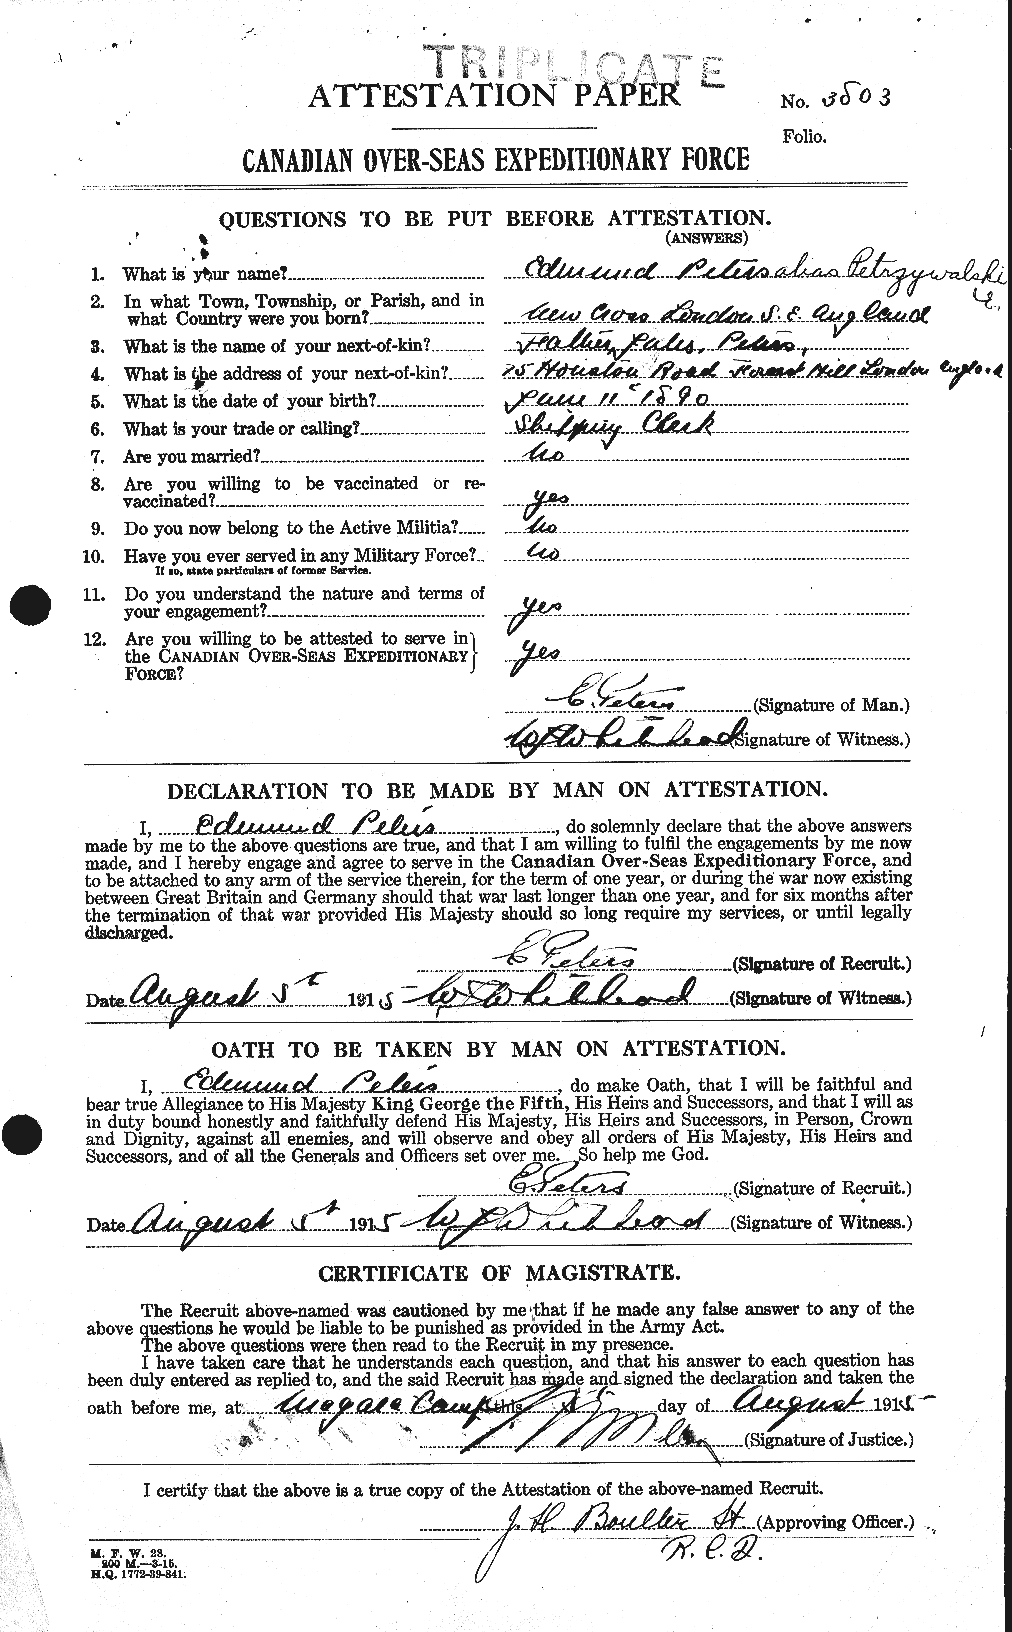 Personnel Records of the First World War - CEF 575401a